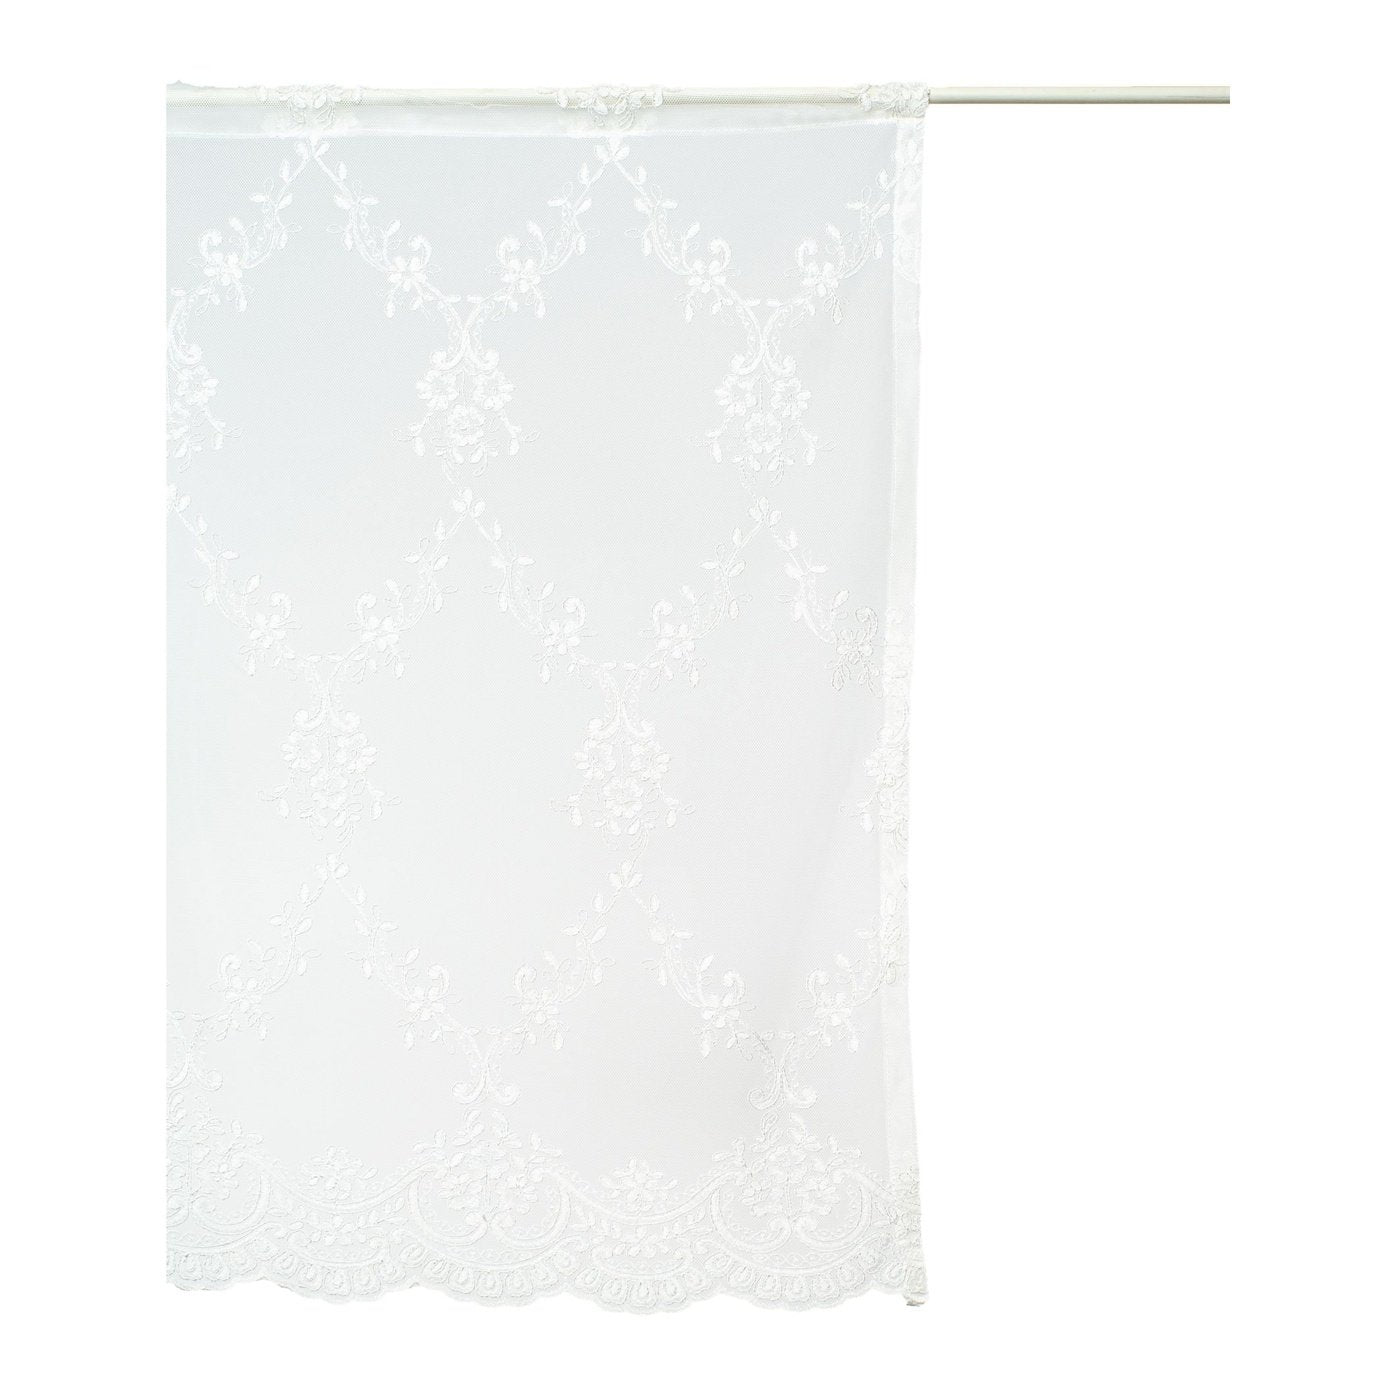 Amelia Lace Curtain: Available in Vieux Rose and off-white to complement your décor.